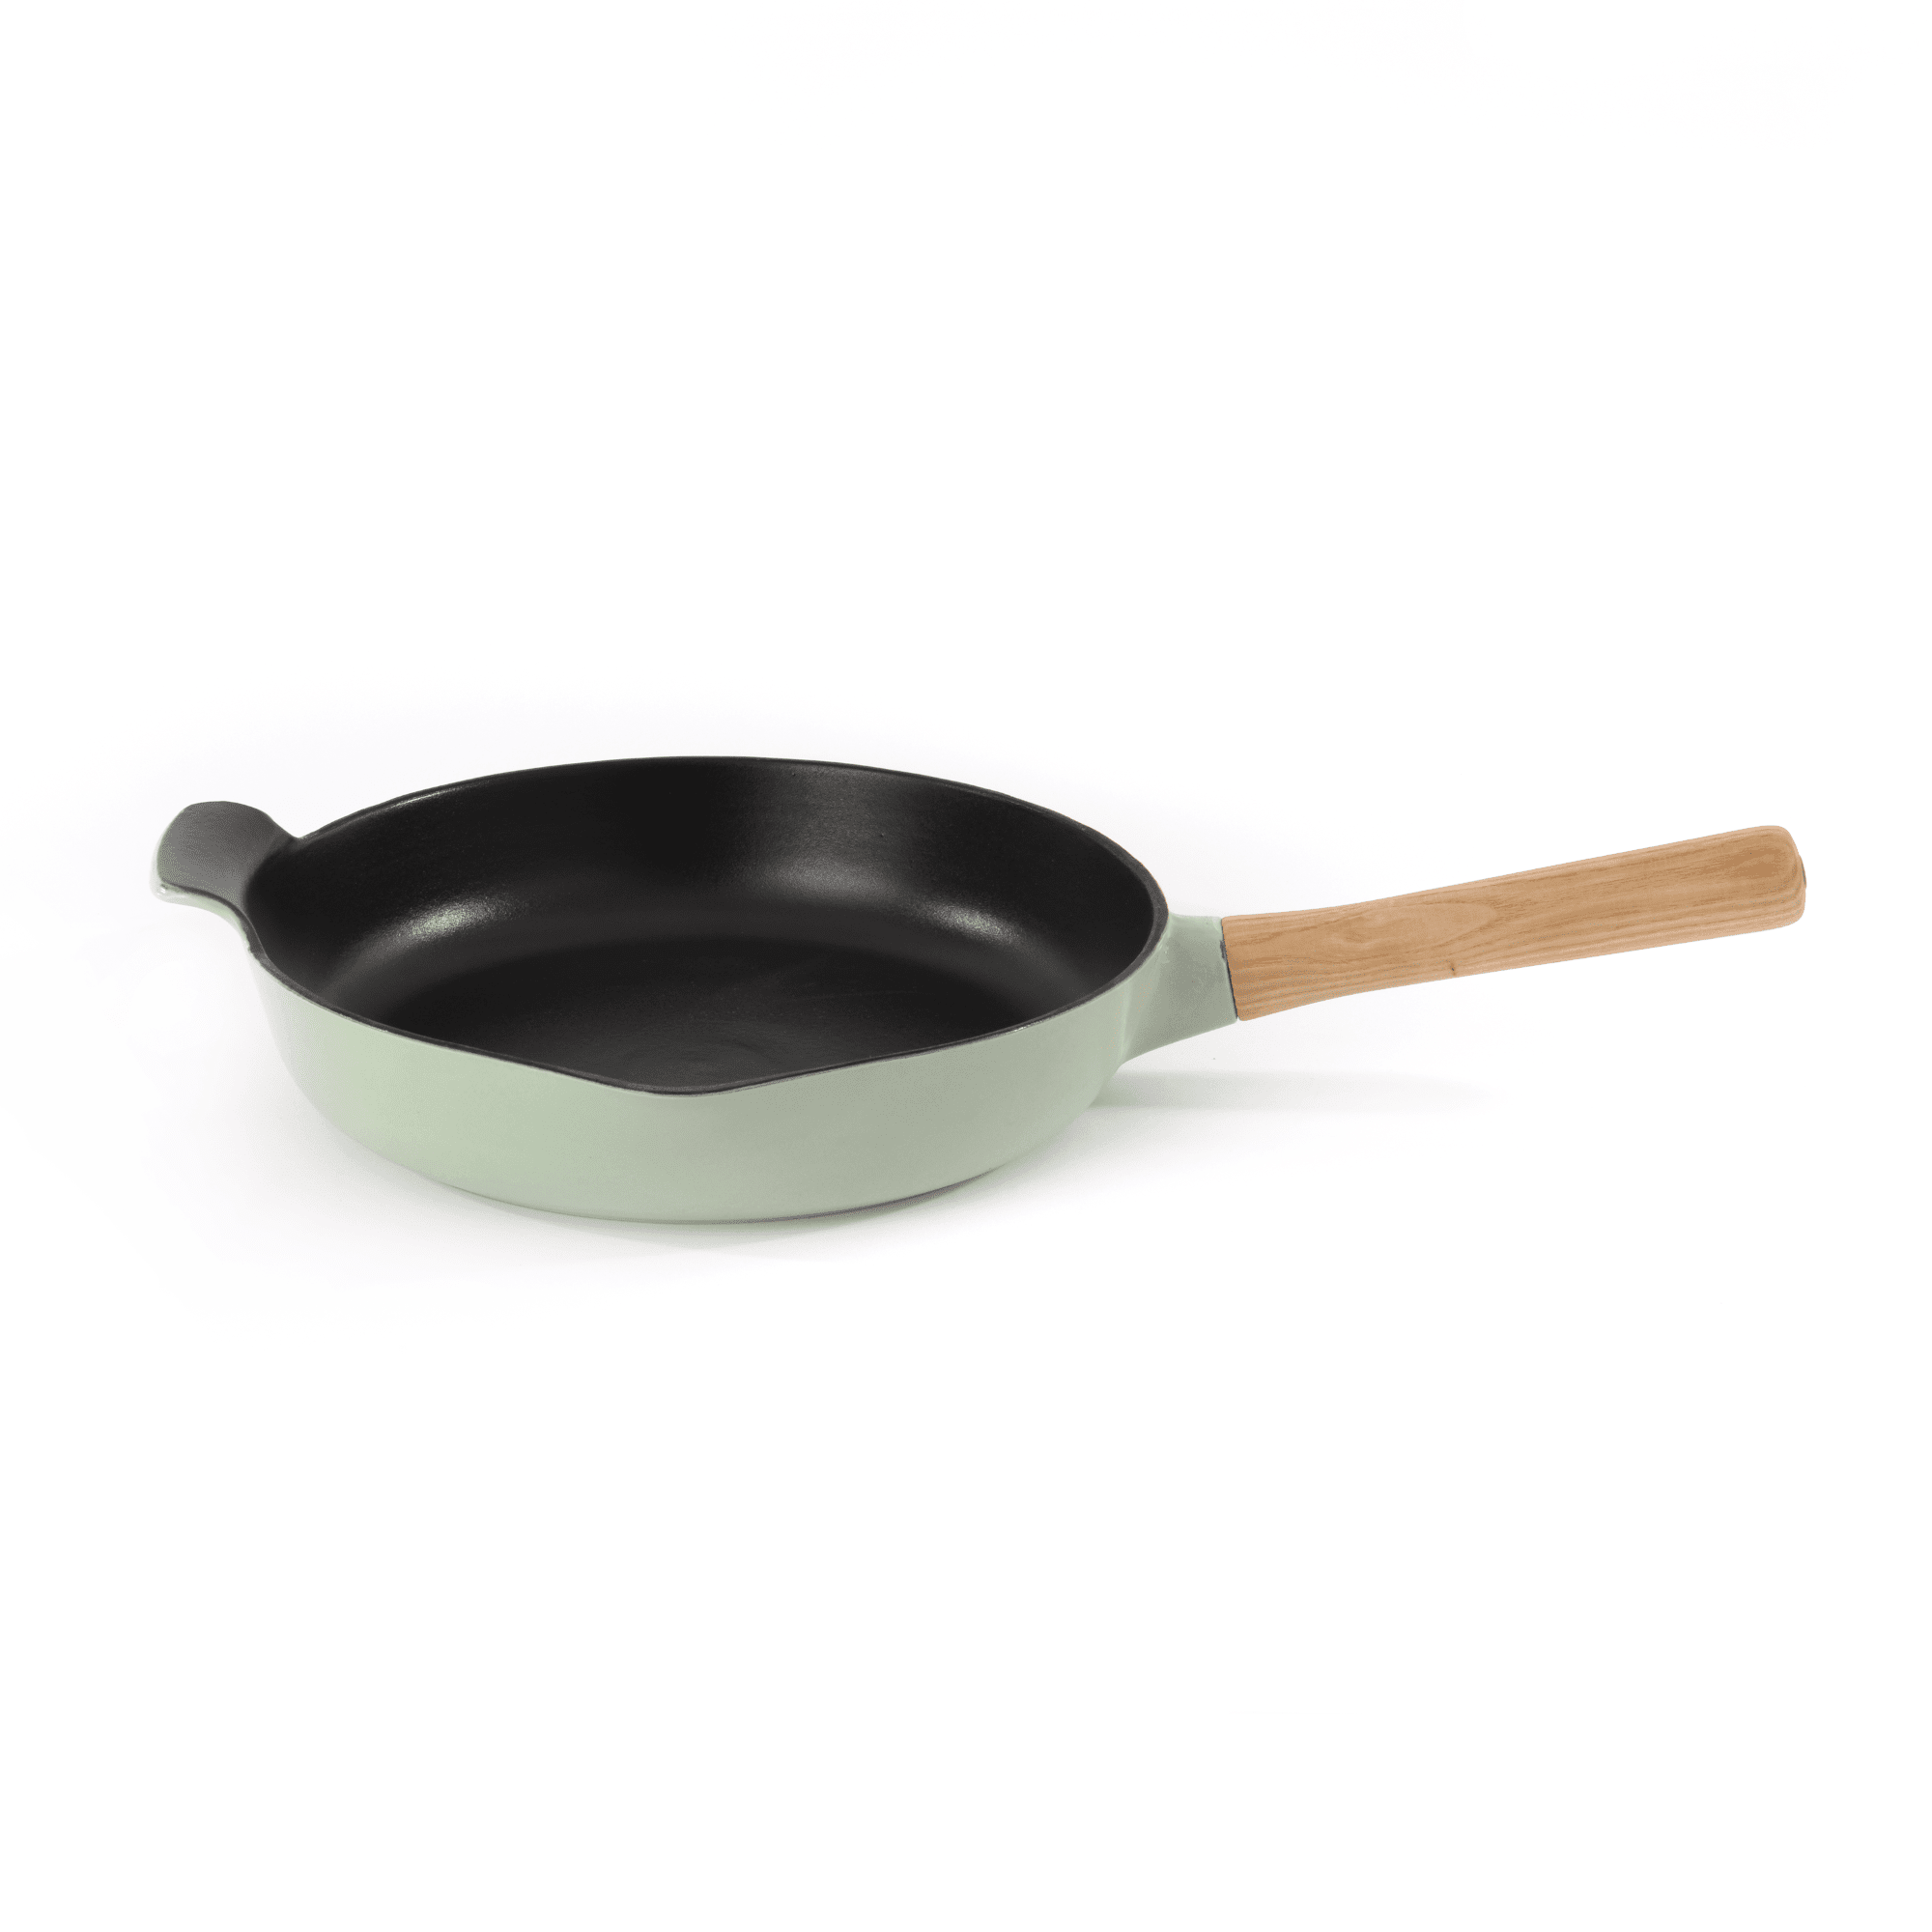 BergHOFF - Ron Green Frying Pan with Wooden Handle 26cm - Cast Iron - 440001529